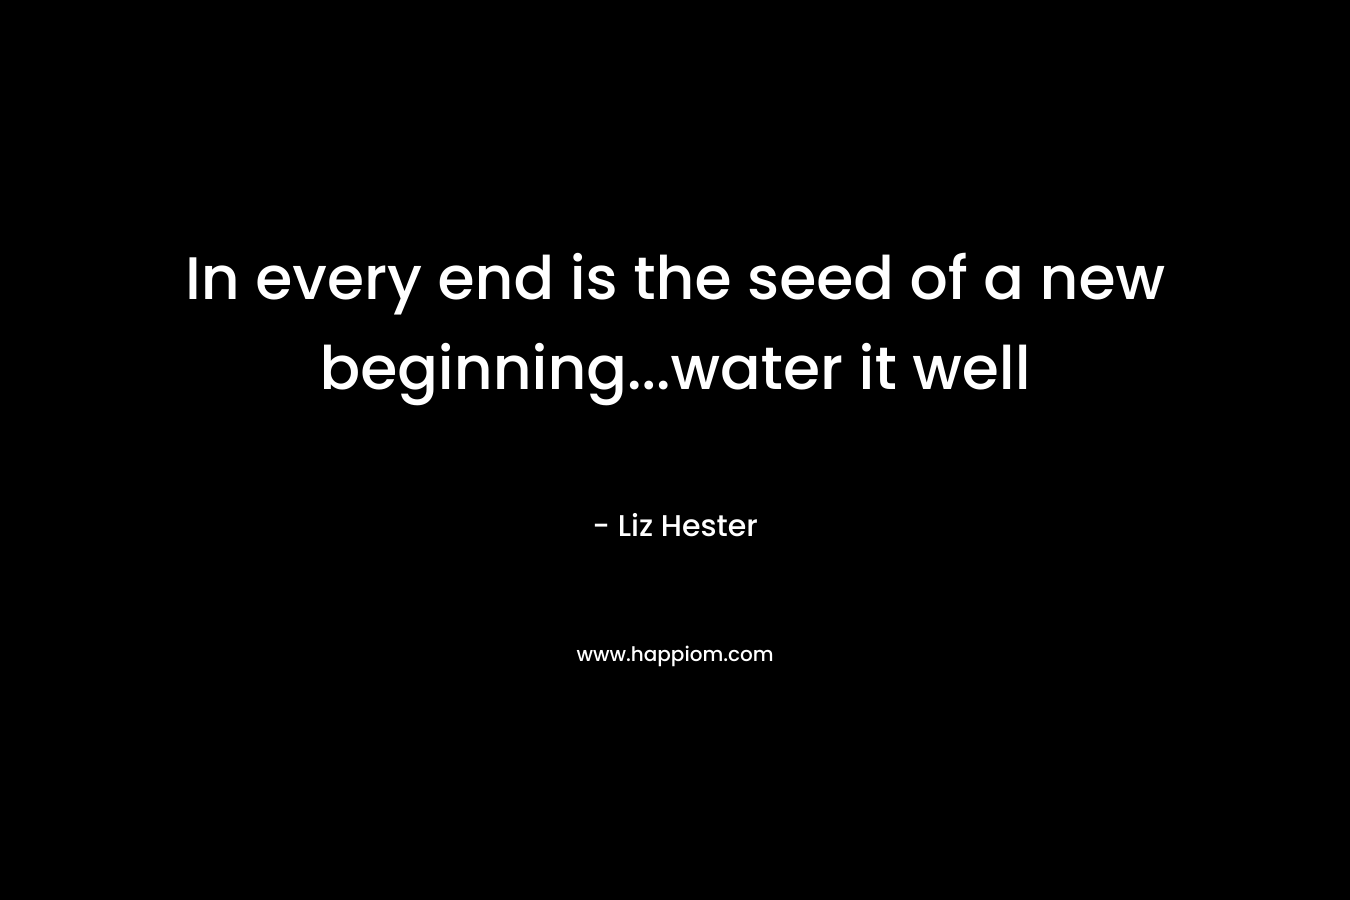 In every end is the seed of a new beginning...water it well